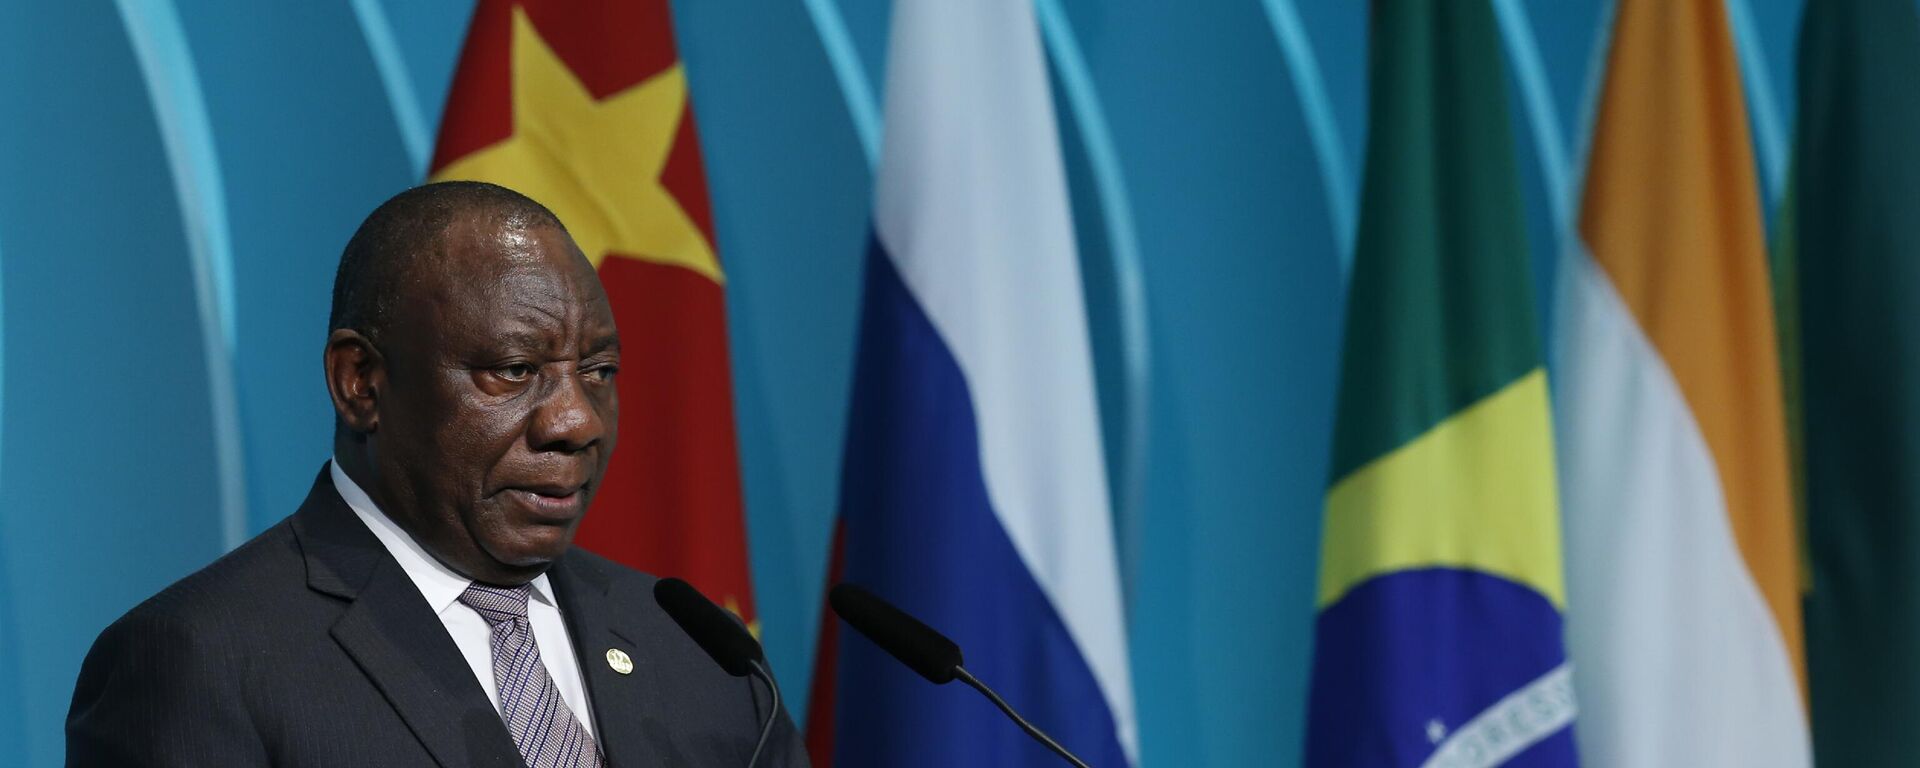 South Africa's President Cyril Ramaphosa speaks during the BRICS Business Council prior the 11th edition of the BRICS Summit, in Brasilia, Brazil, Wednesday, Nov. 13, 2019. - Sputnik International, 1920, 12.01.2023